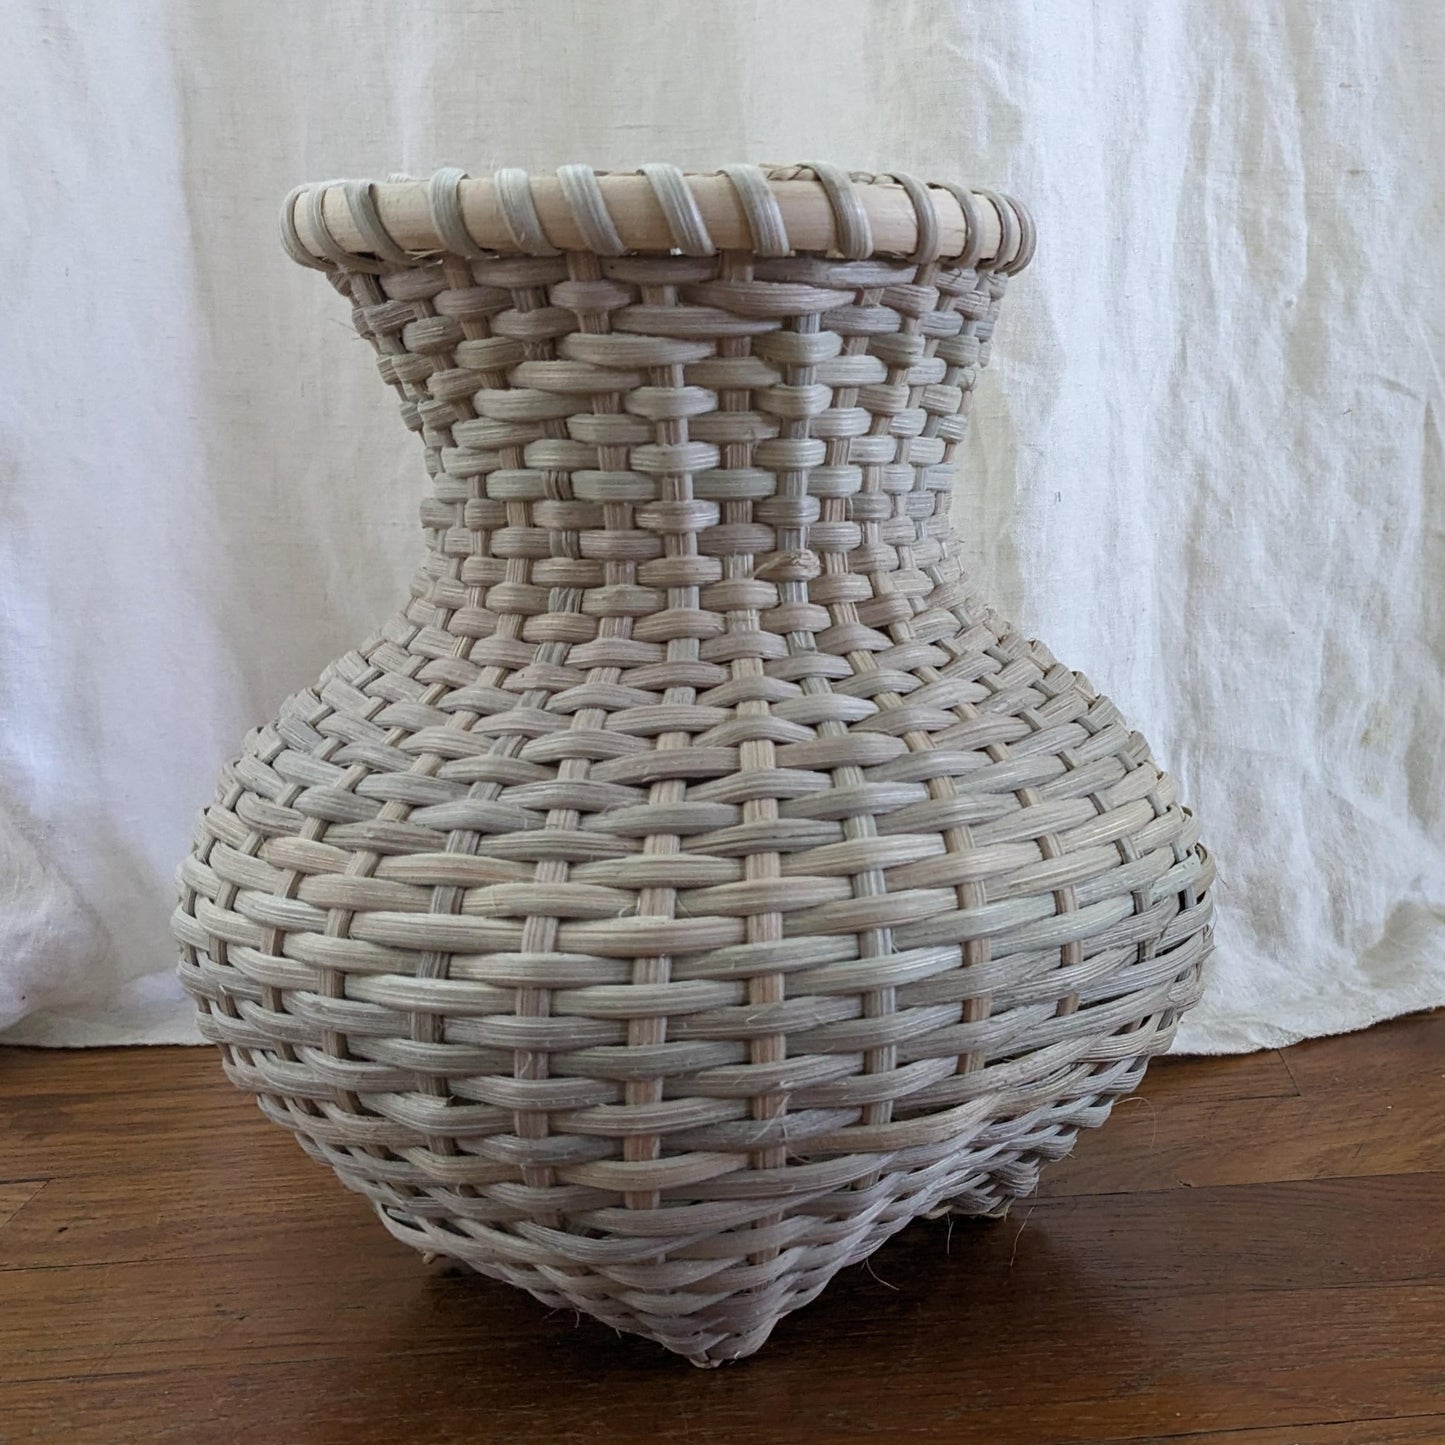 Stair Step Vase Basket Pattern and Instruction Manual